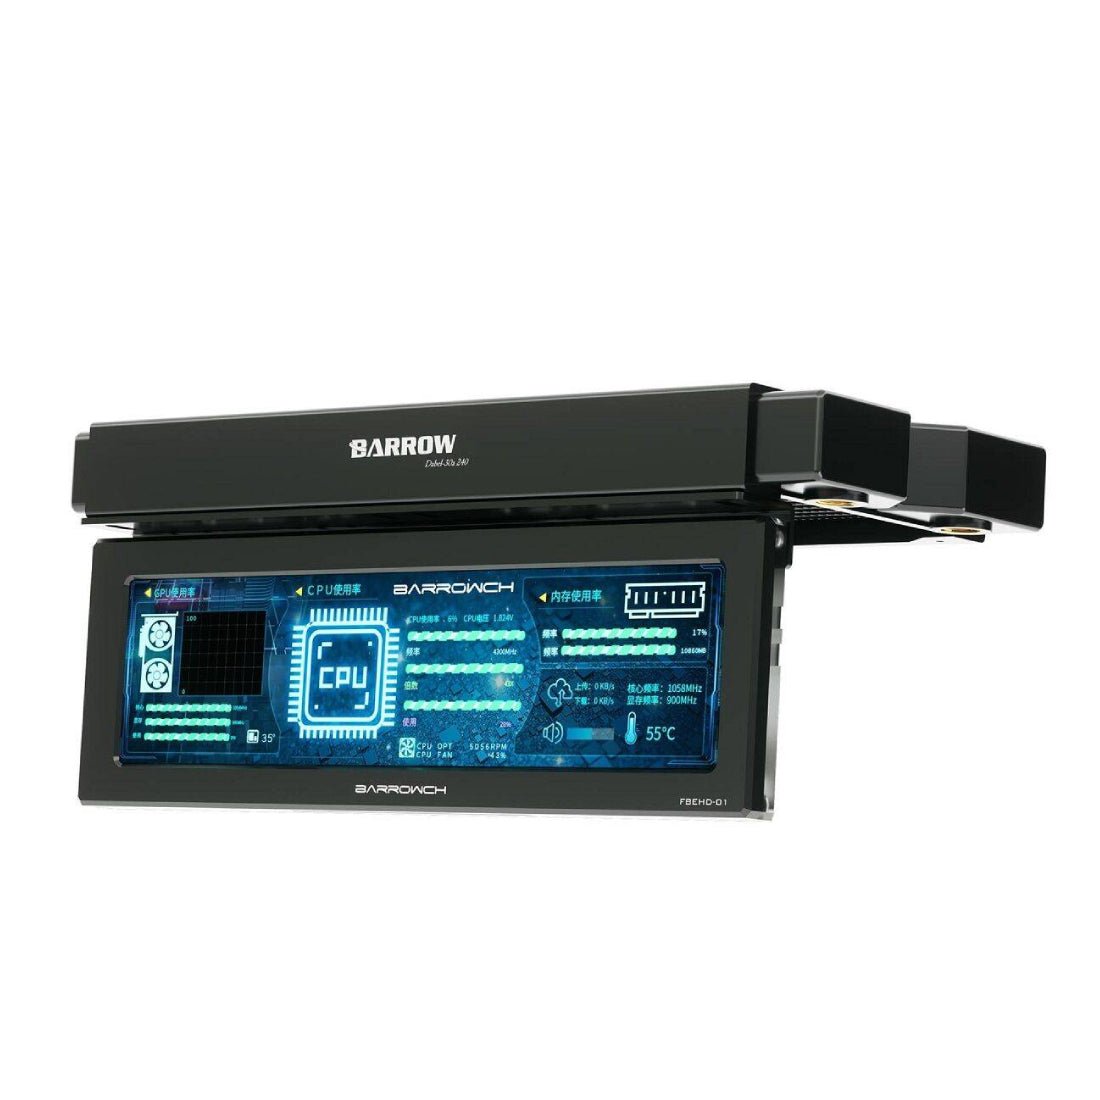 Barrowch 250mm IPS High Definition System Monitoring LCD Display - Black - Store 974 | ستور ٩٧٤